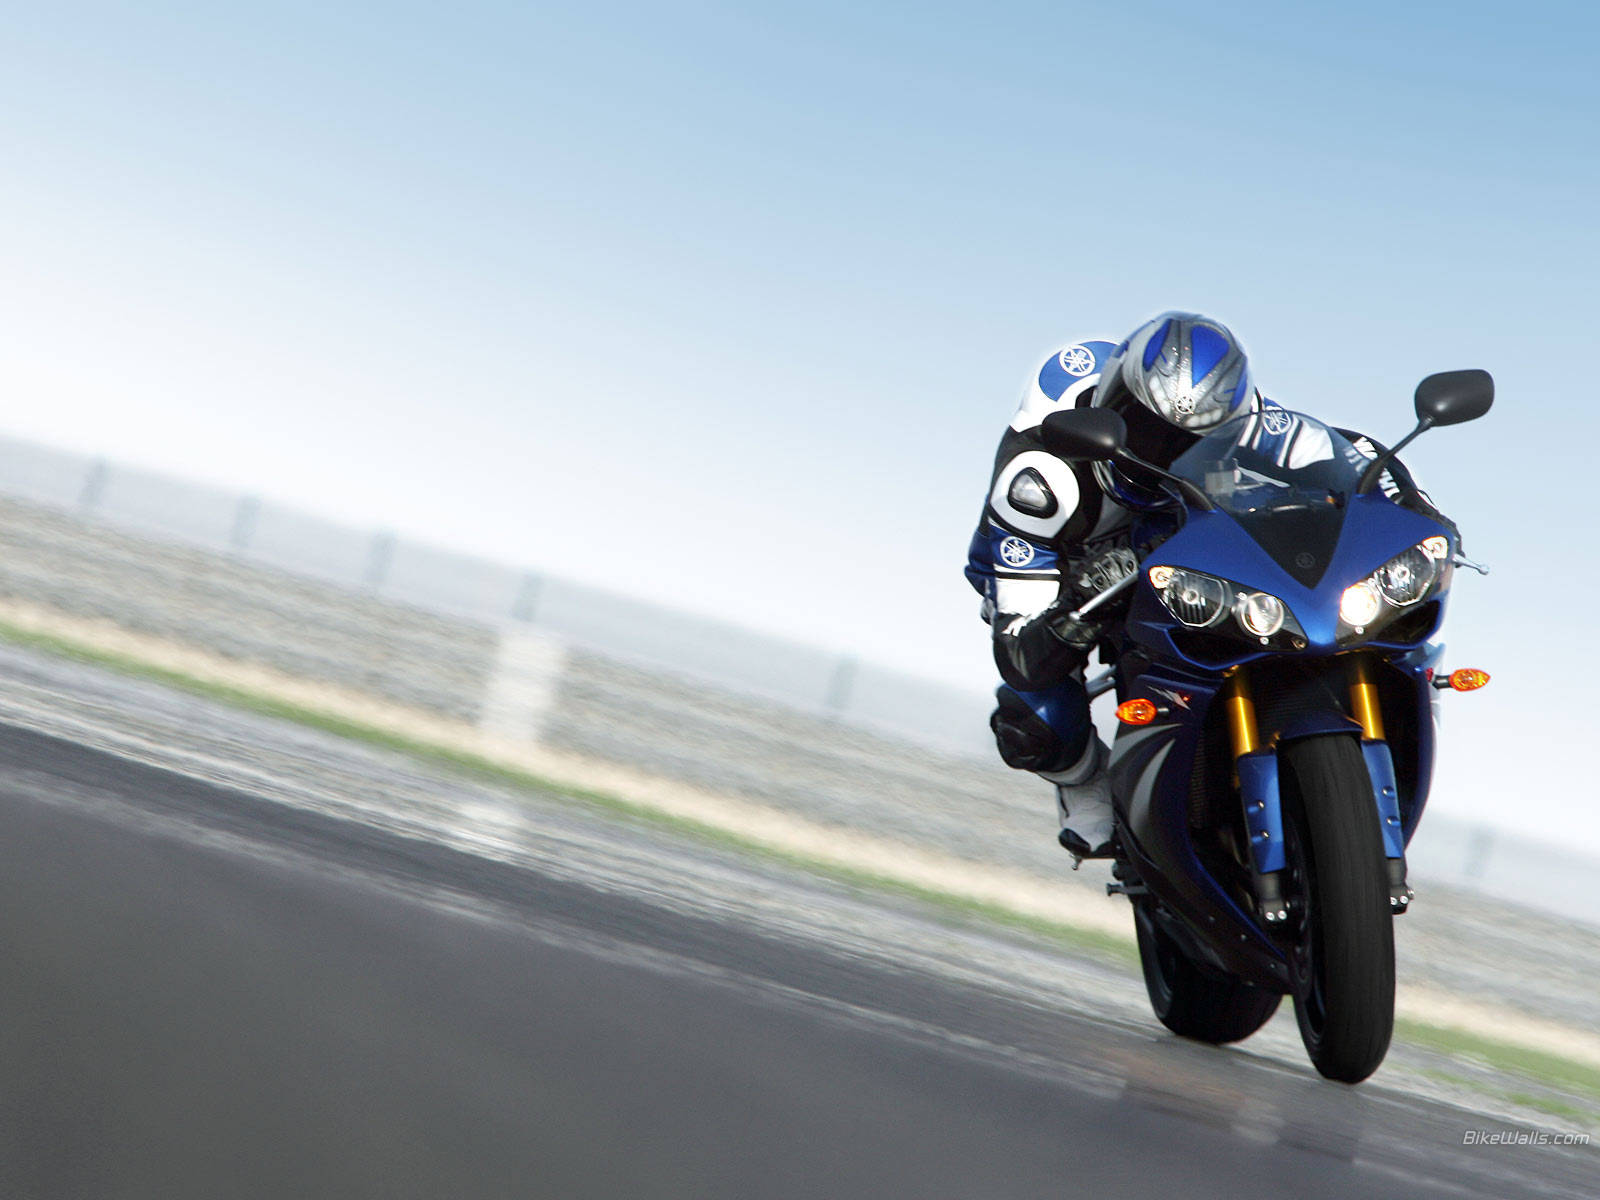 HD Yamaha Wallpaper Amp Background Image For